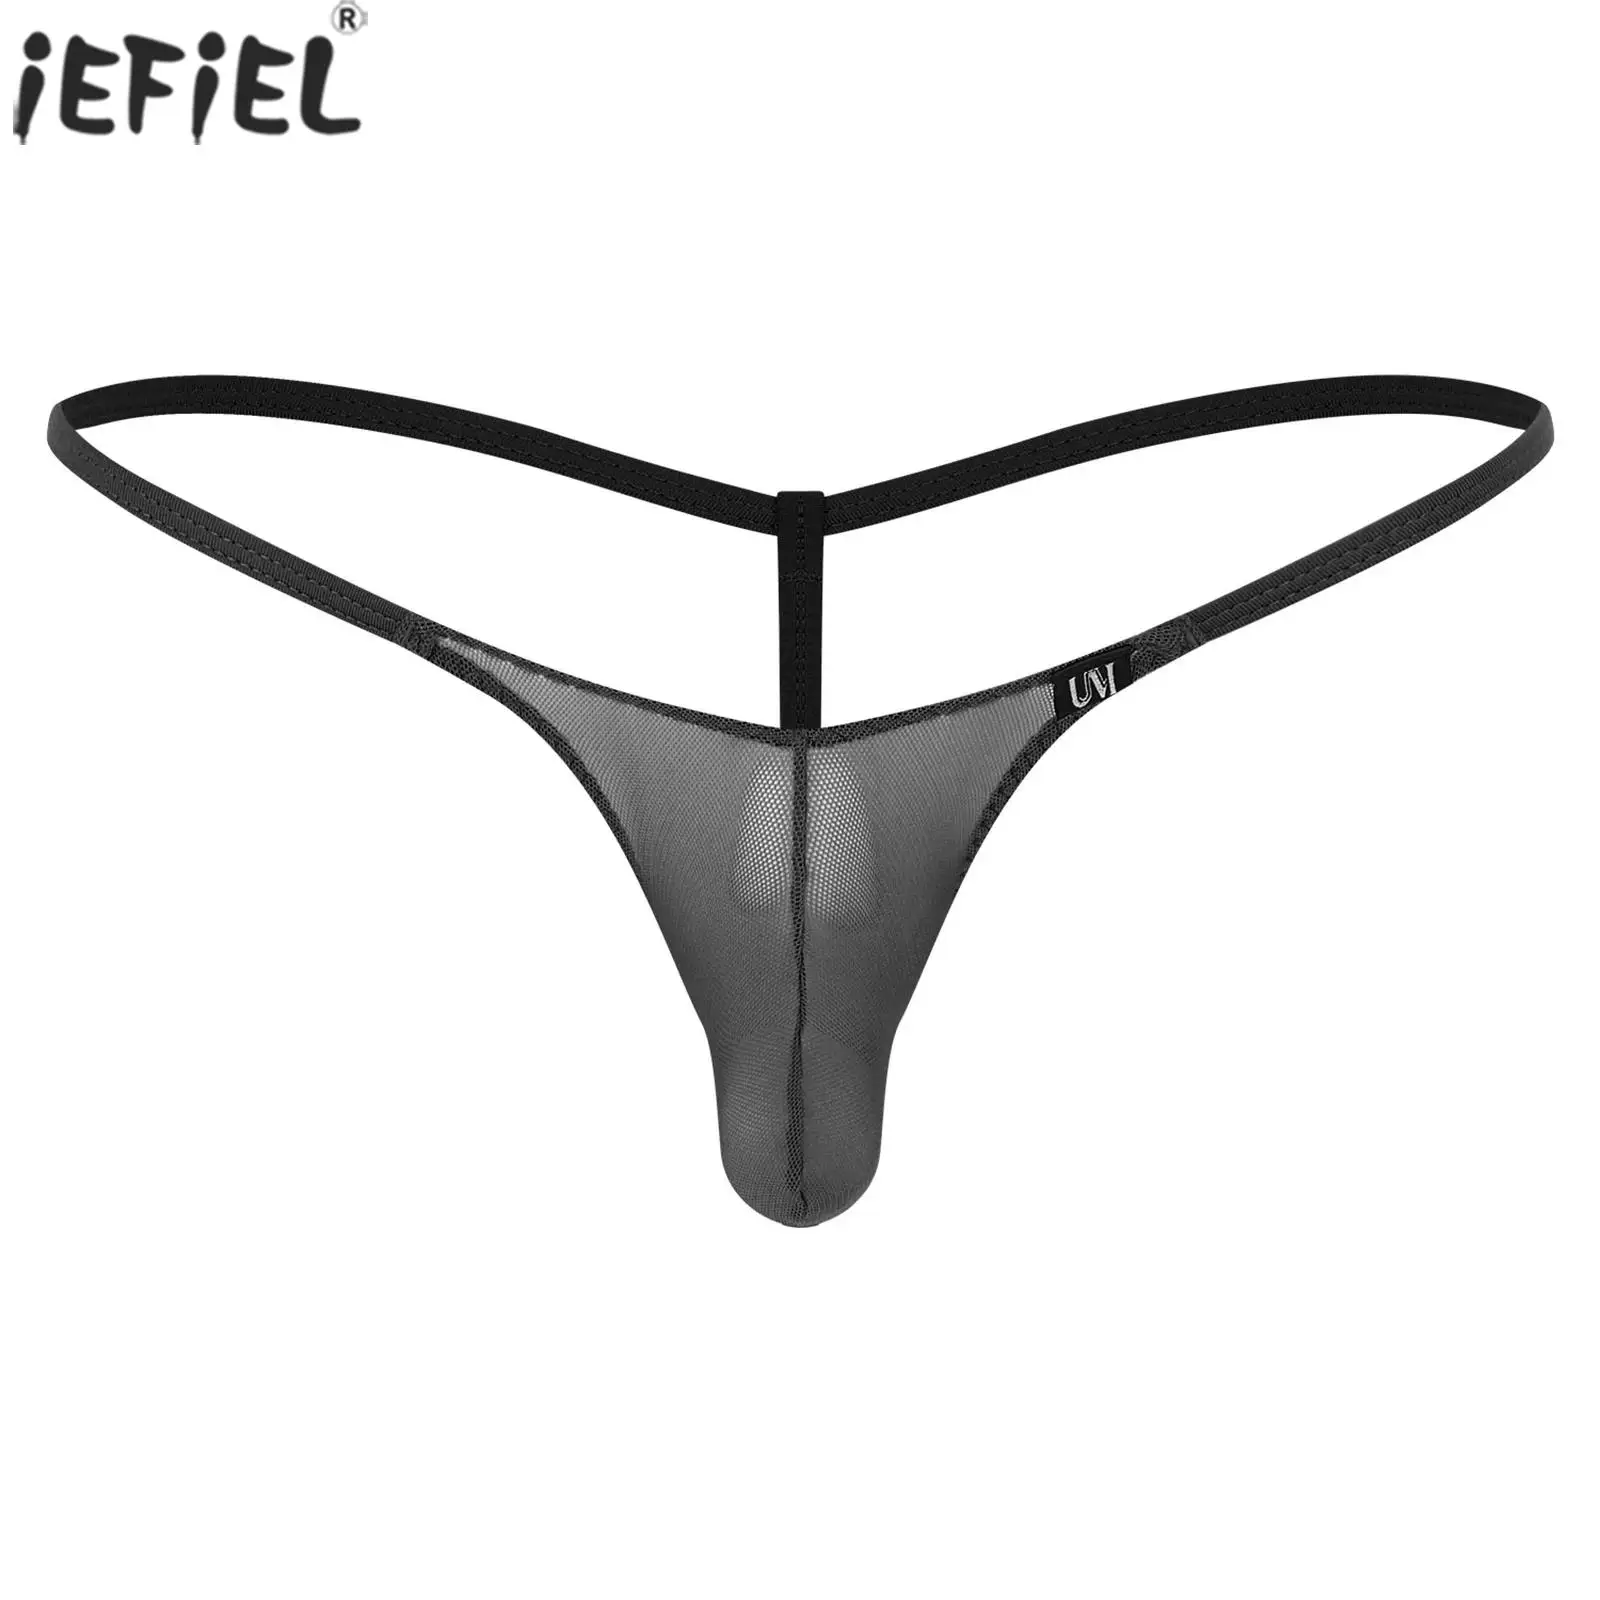 

Men Underwear Thongs See Through Male Sexy Transparent Bulge Pouch Thong Sheer Panties Low Waist Mesh Gay G-string Underpants